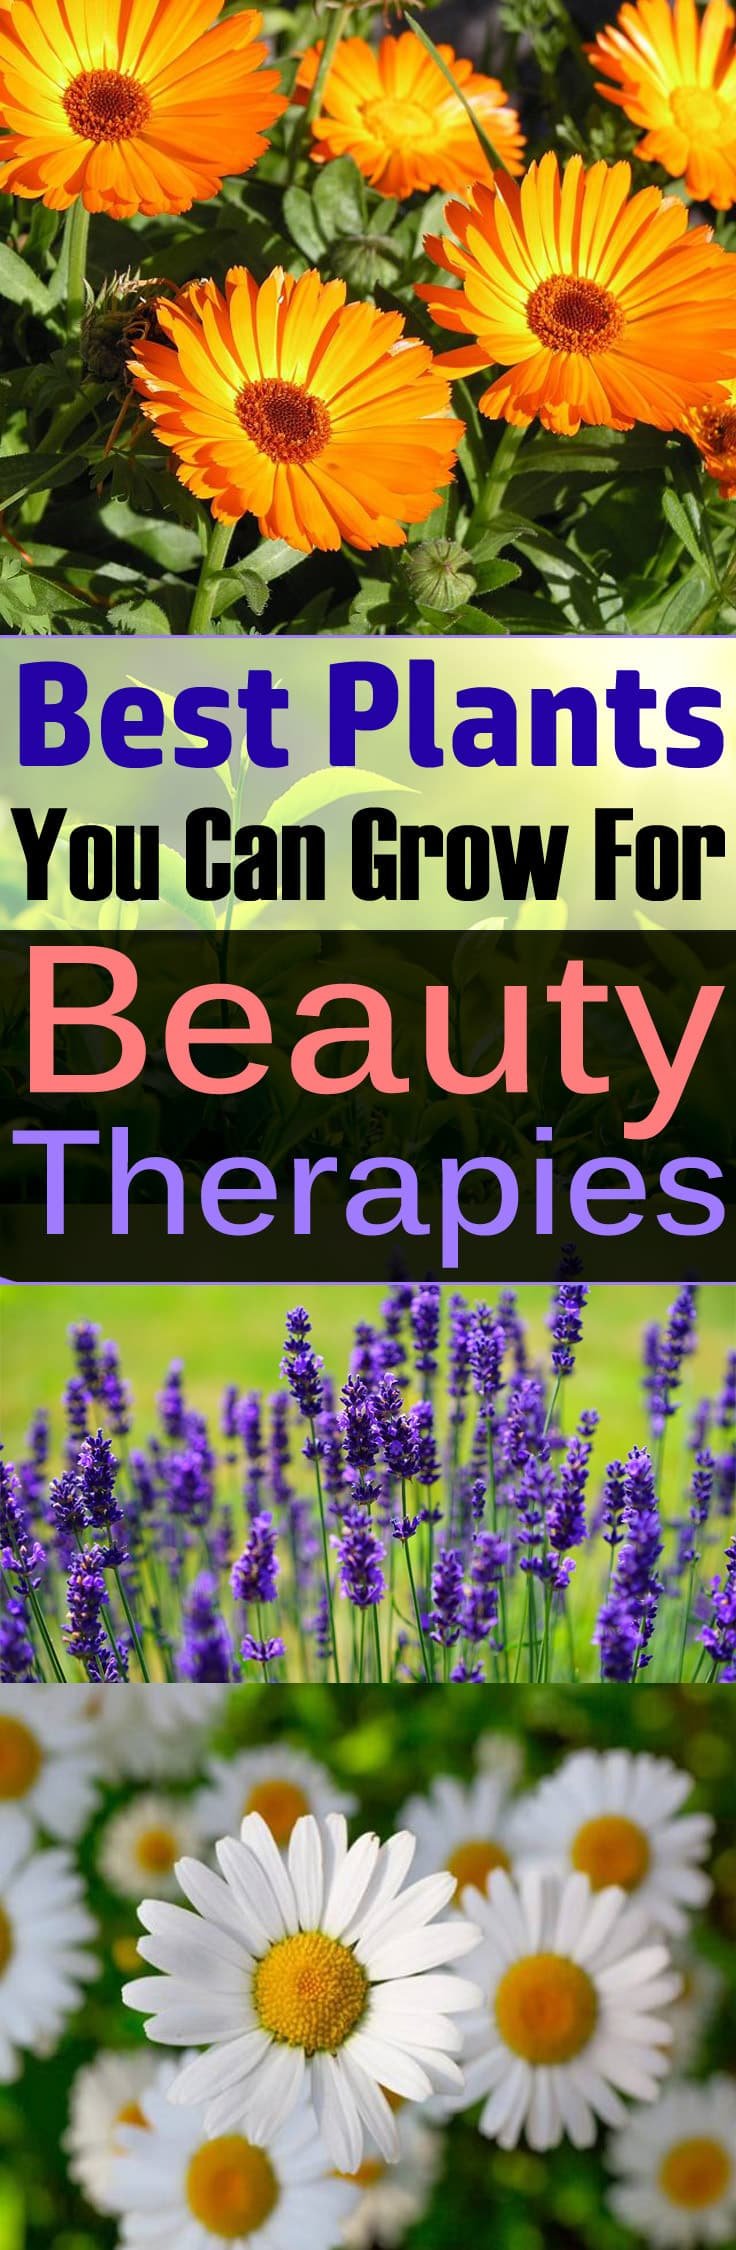 Want to grow plants that can make you more beautiful? Just learn about the plants you can grow for beauty therapies. Must Read!